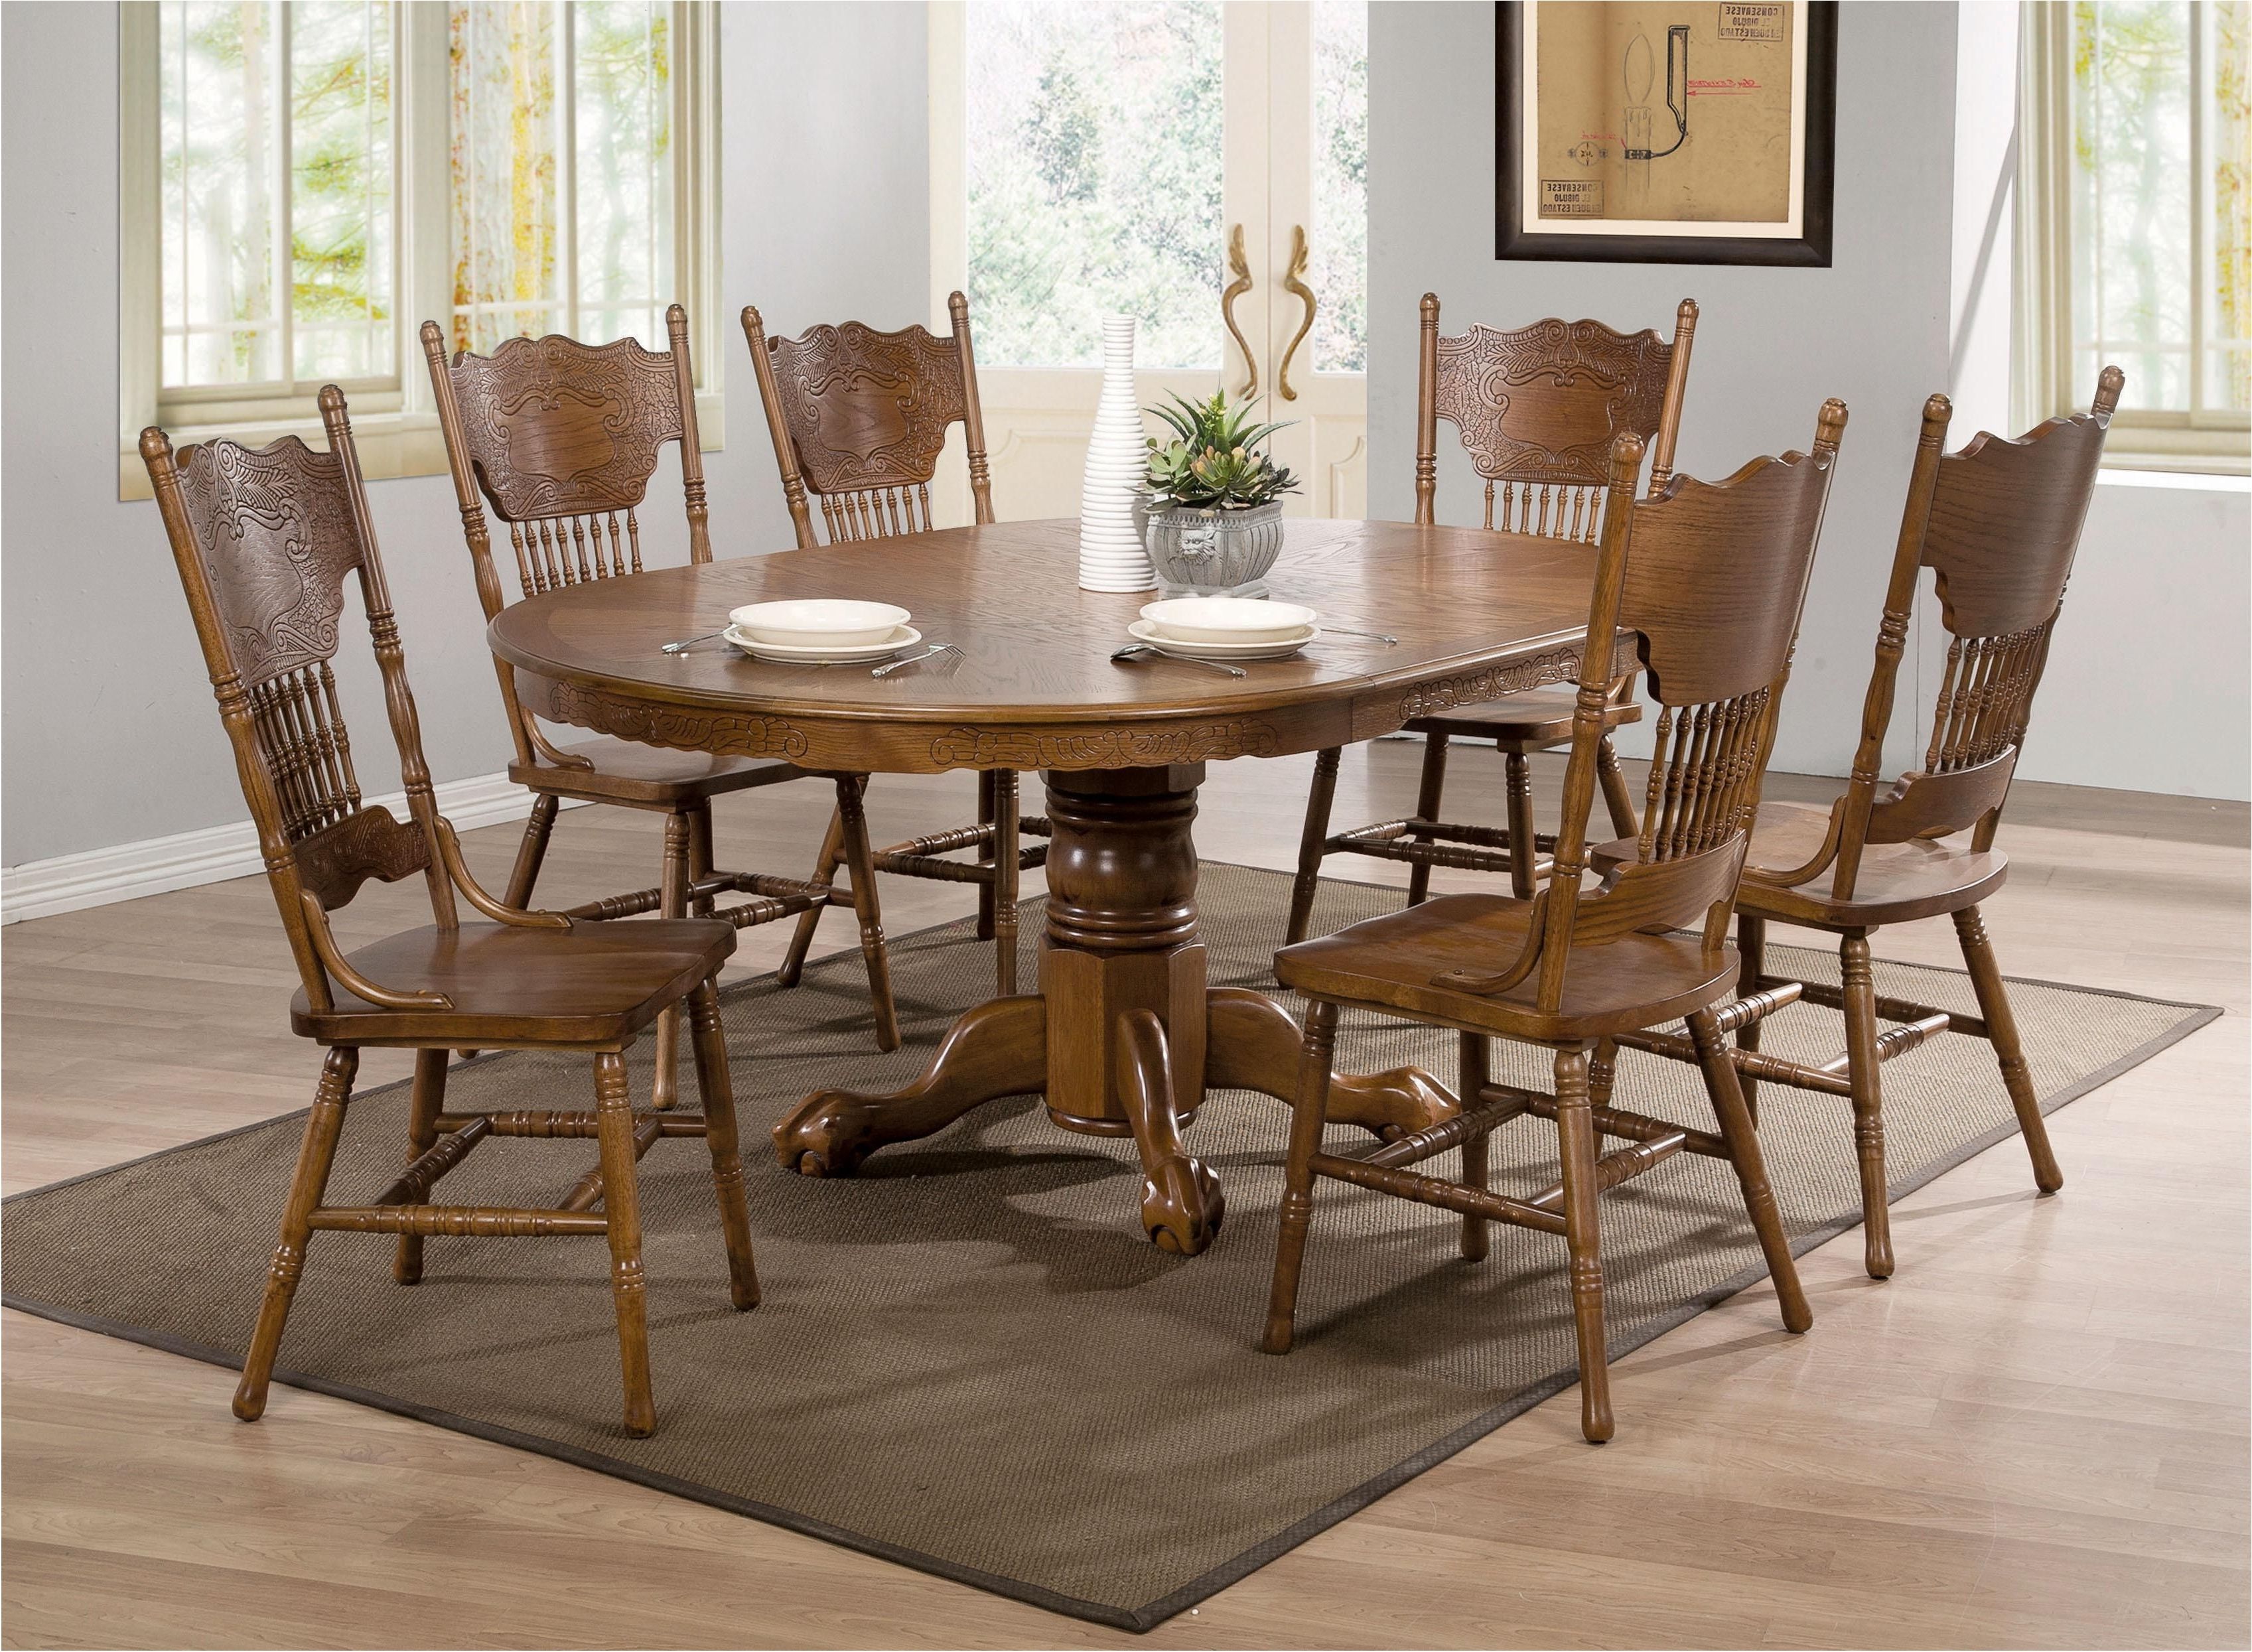 Oak Furniture Dining Sets Throughout Most Recent Incredible Decorative Oak Dining Table Set 16 Kitchen And Chairs (View 24 of 25)